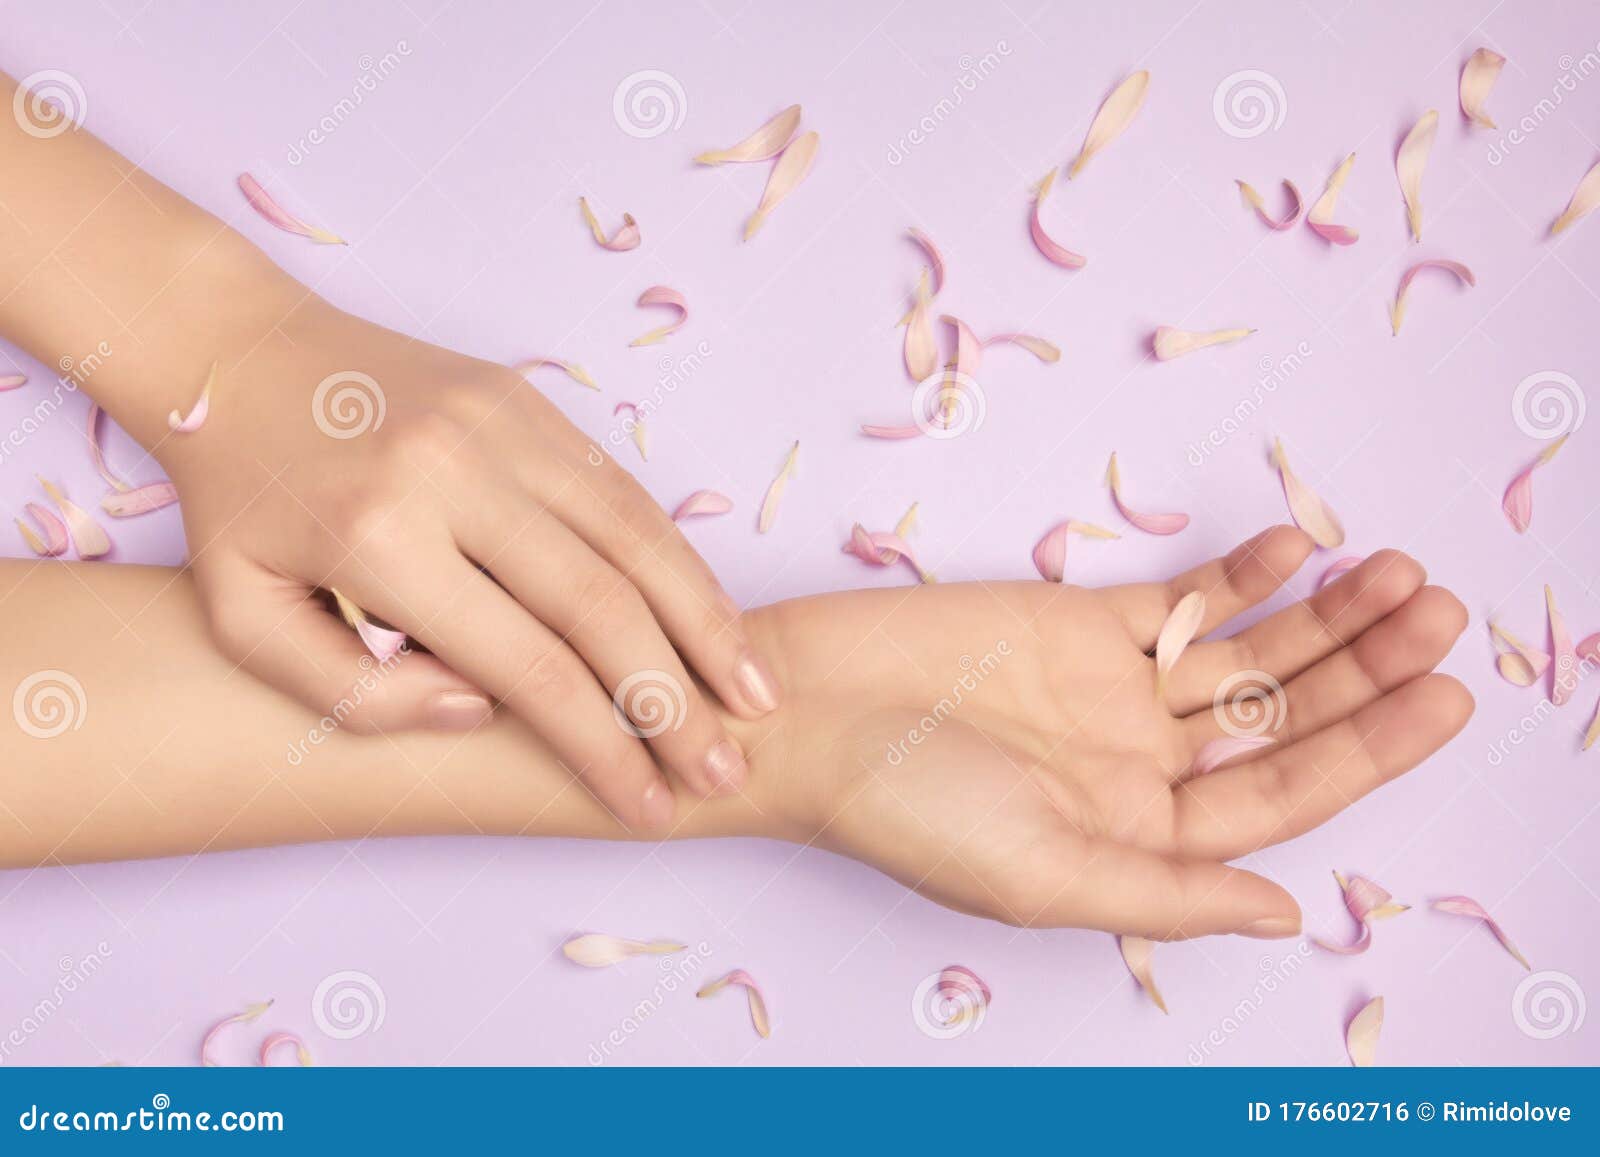 pink petals of a flower in gentle womans hands on a violet background. concept of advertisment of beauty salon. gift certificate.